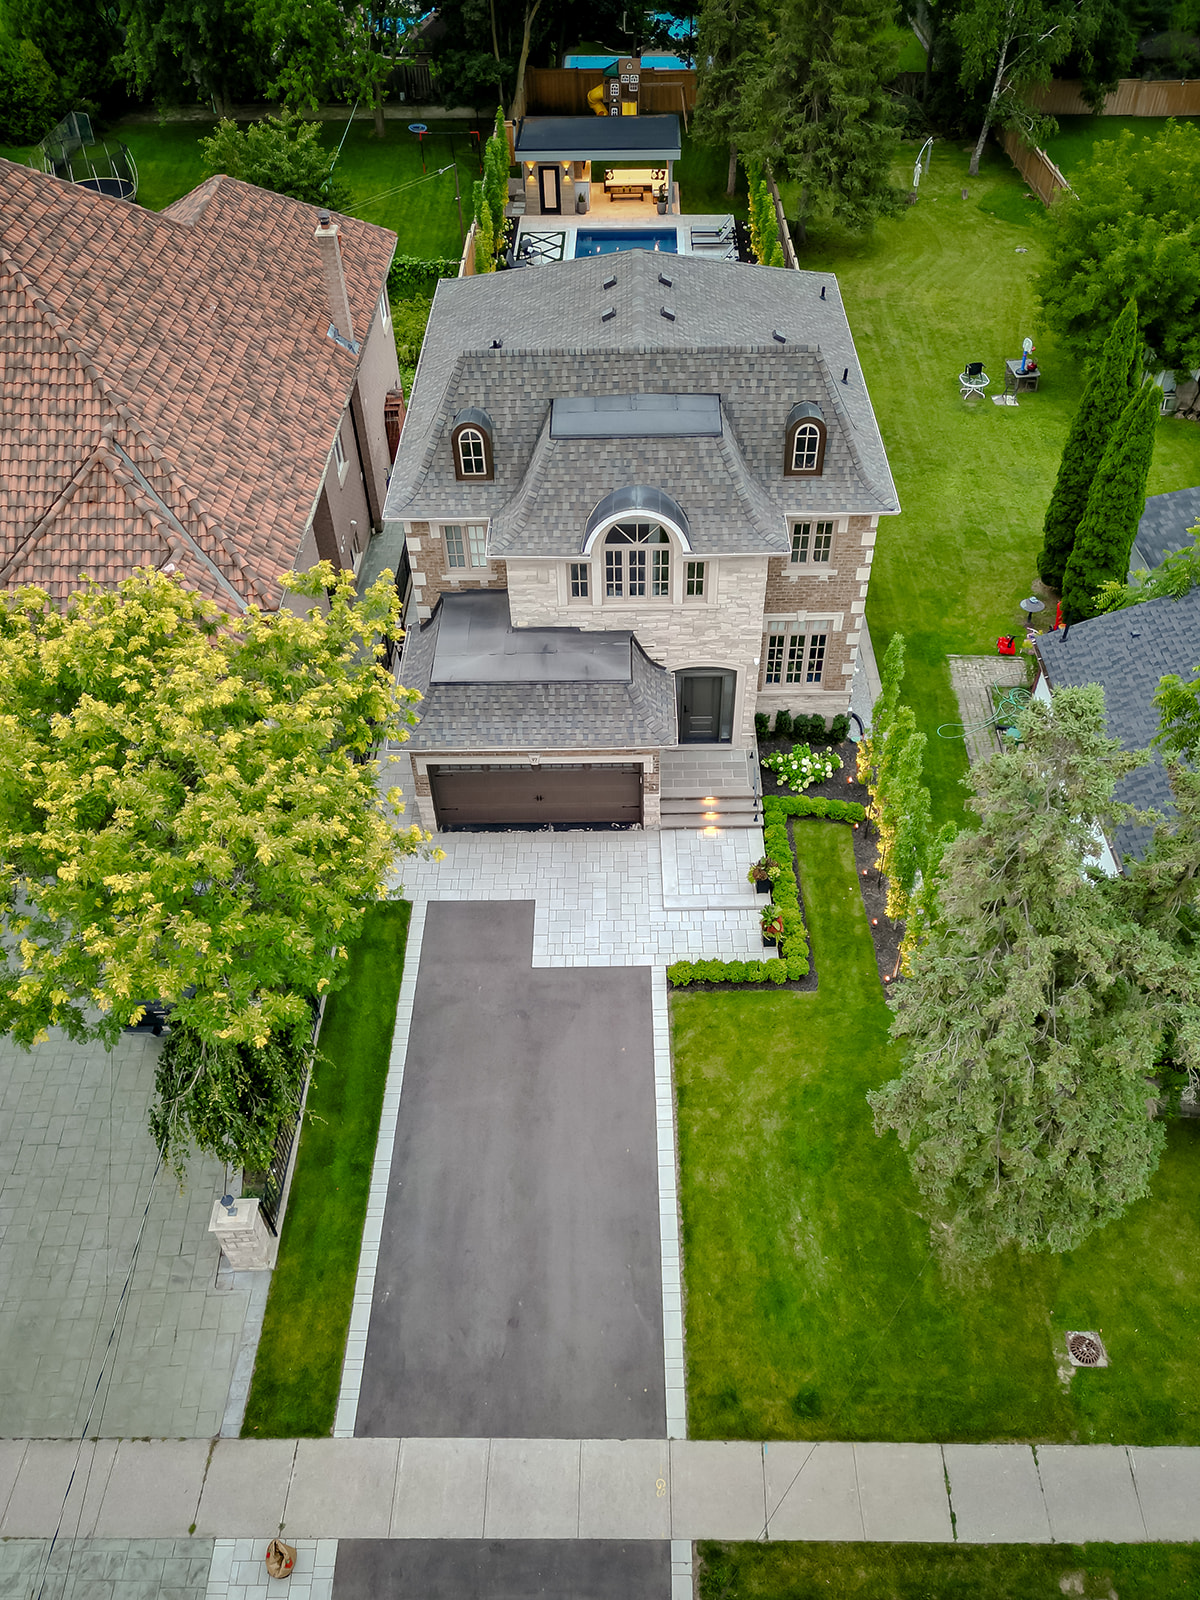 A drone shot of the front of the house with a paved driveway.